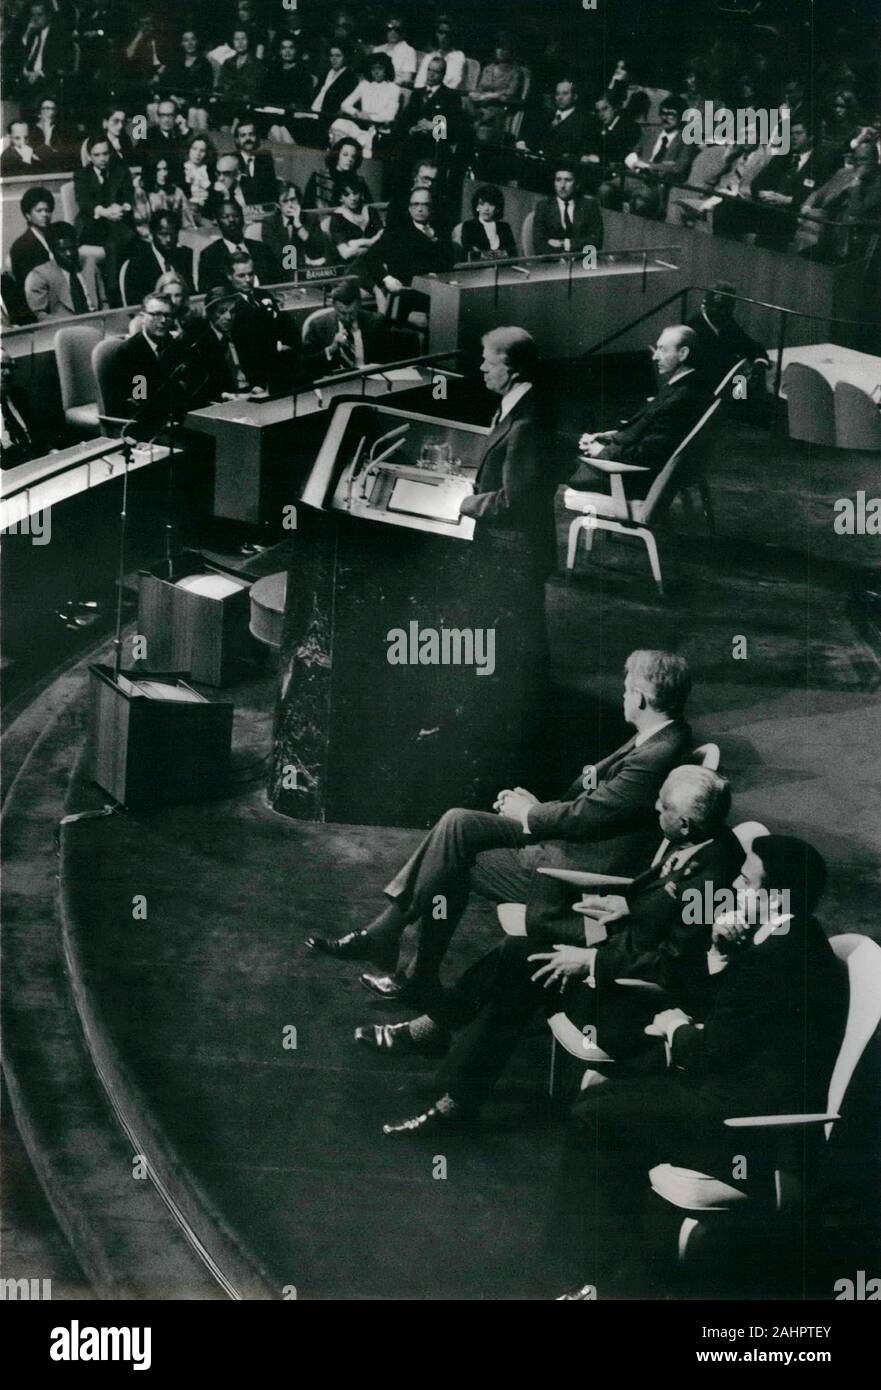 Mar. 03, 1977 - New York, New York, USA - President JIMMY CARTER speaks from the podium at the UN, United Nations headquarters in NYC. Seated from bottom right, US UN Ambassador ANDREW YOUNG, General Assembly President HAMILTON AMERASINGHE, and past Carter on right, UN Secretary General KURT WALDHEIM. (Credit Image: © Keystone Press Agency/Keystone USA via ZUMAPRESS.com) Stock Photo